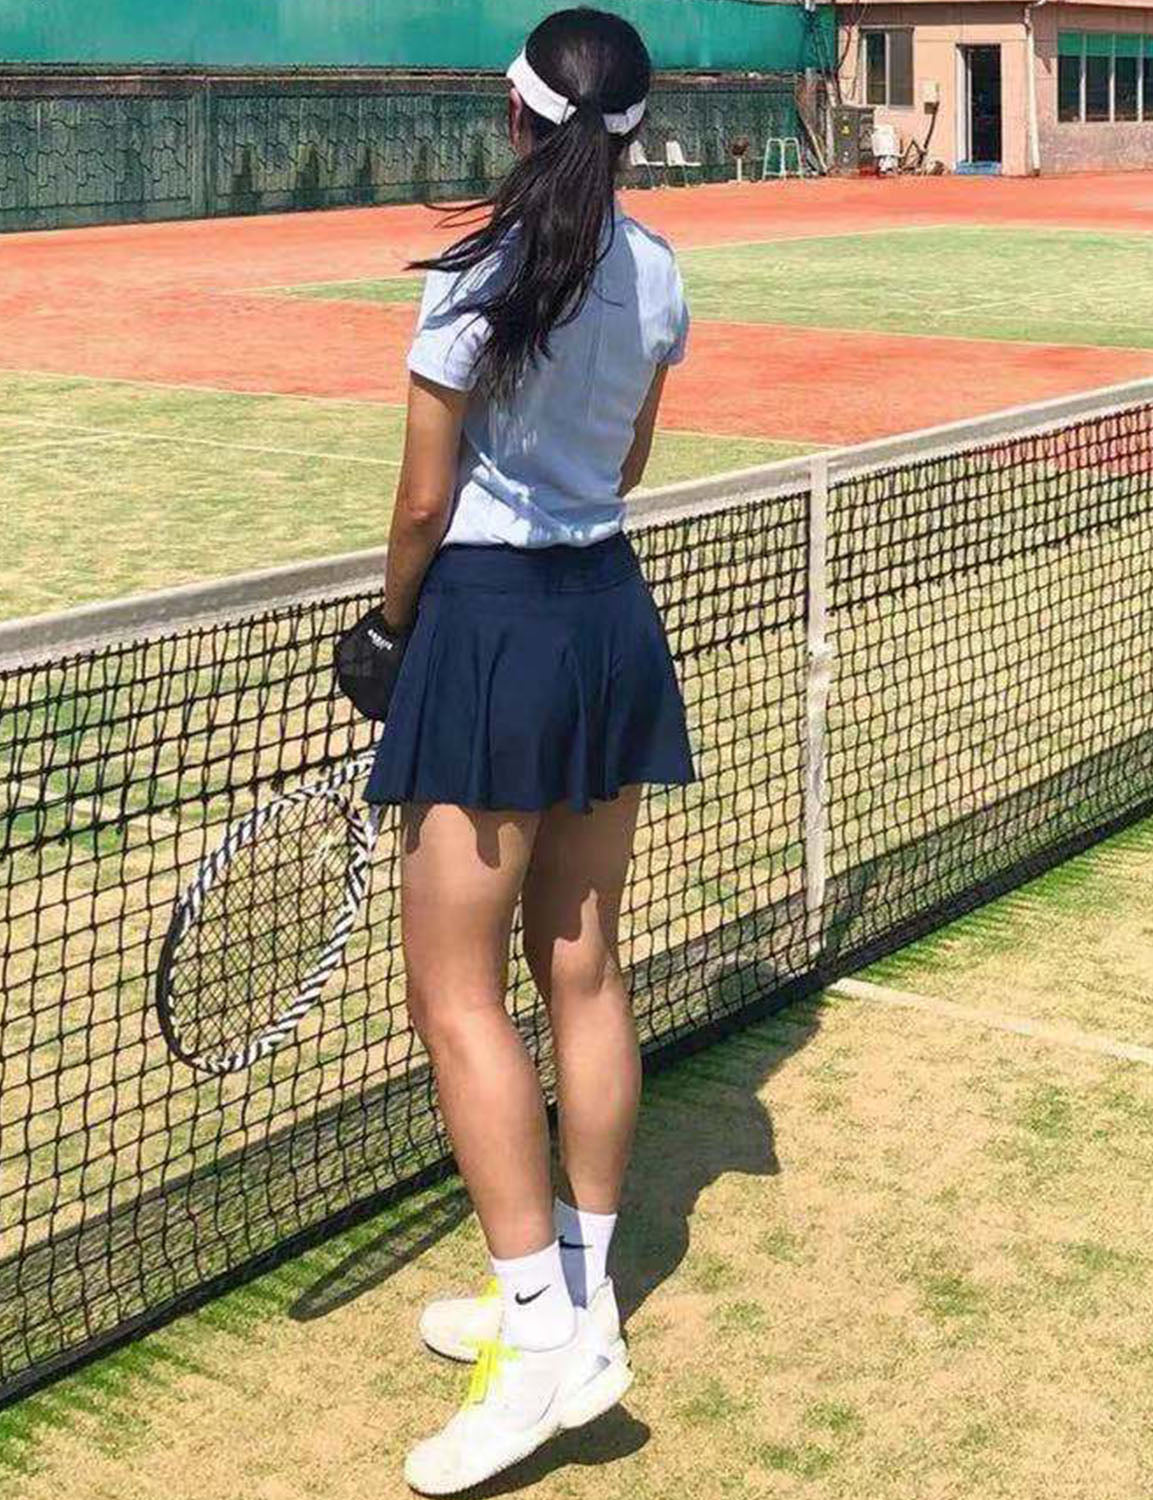 Athletic Tennis Golf Pleated Skort Awith Pocket Shorts darknavy 80%Nylon/20%Spandex UPF 50+ sun protection Elastic closure Lightweight, Wrinkle Moisture wicking Quick drying Secure & comfortable two layer Hidden pocket